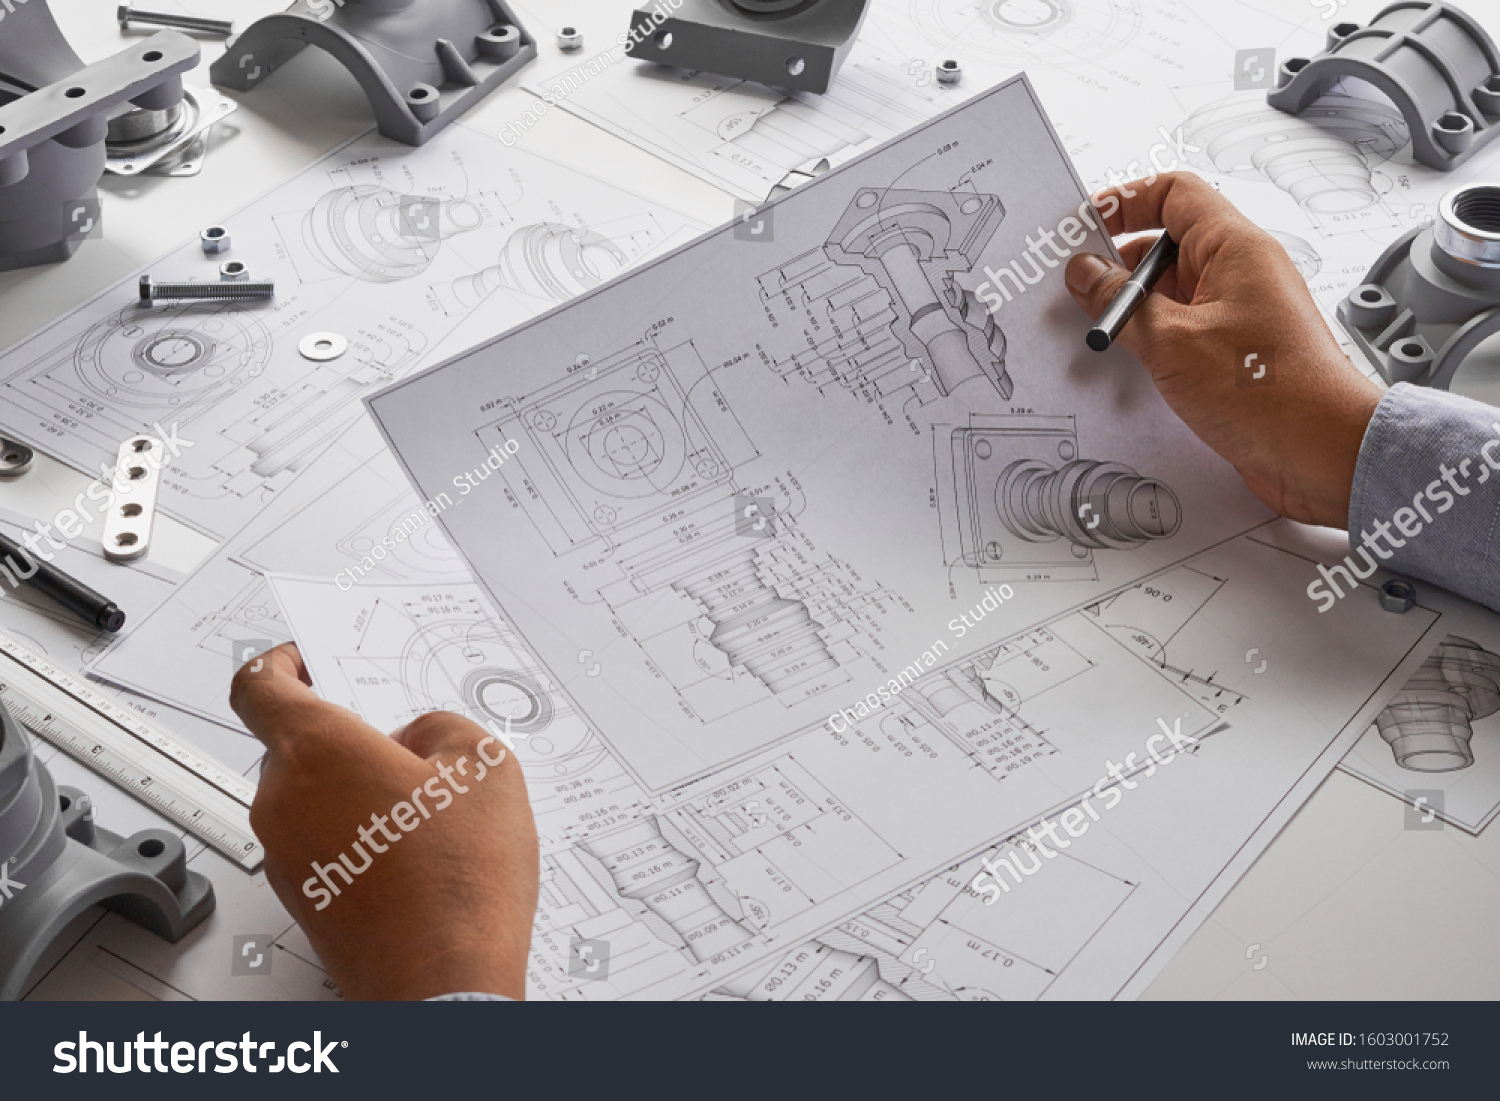 stock-photo-engineer-technician-designing-drawings-mechanical-parts-engineering-engine-manufacturing-factory-1603001752